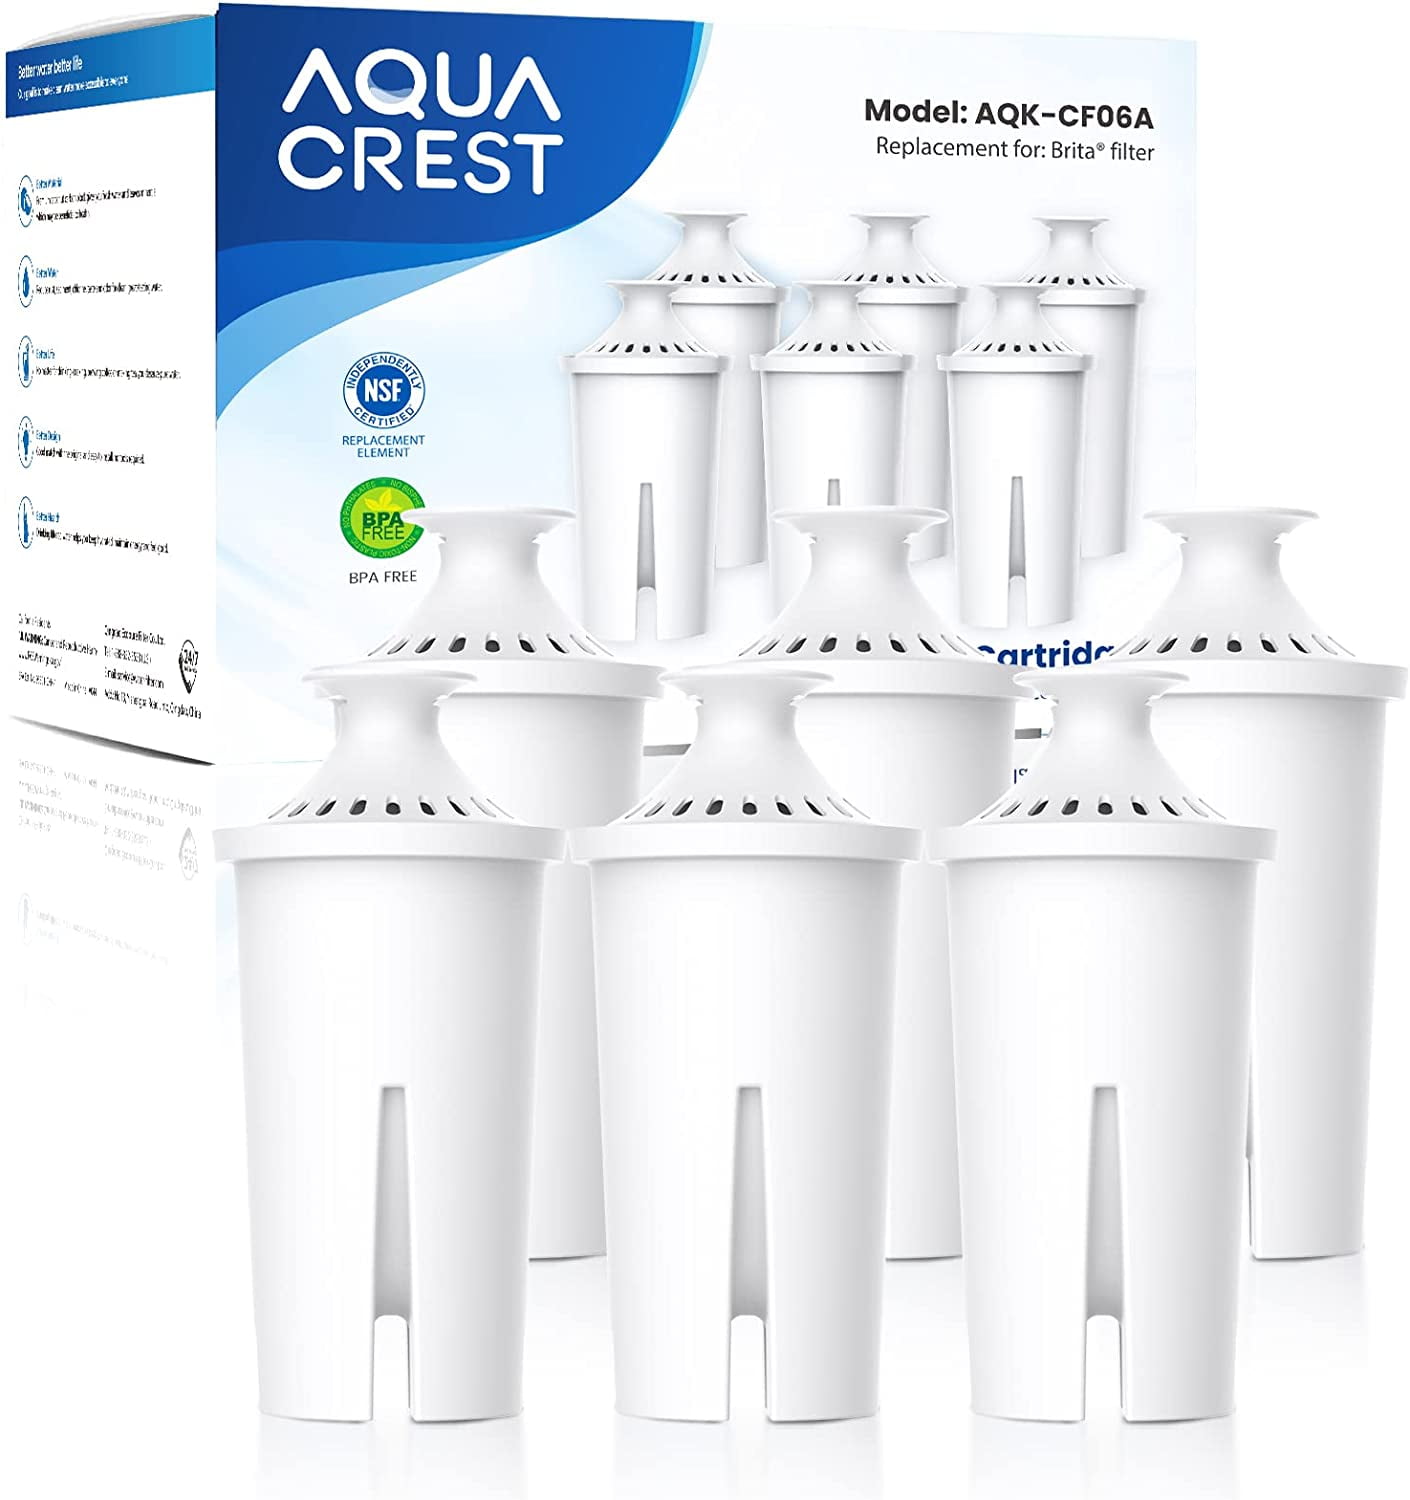 The Aqua Optima® Water Filter Free Recycling Programme